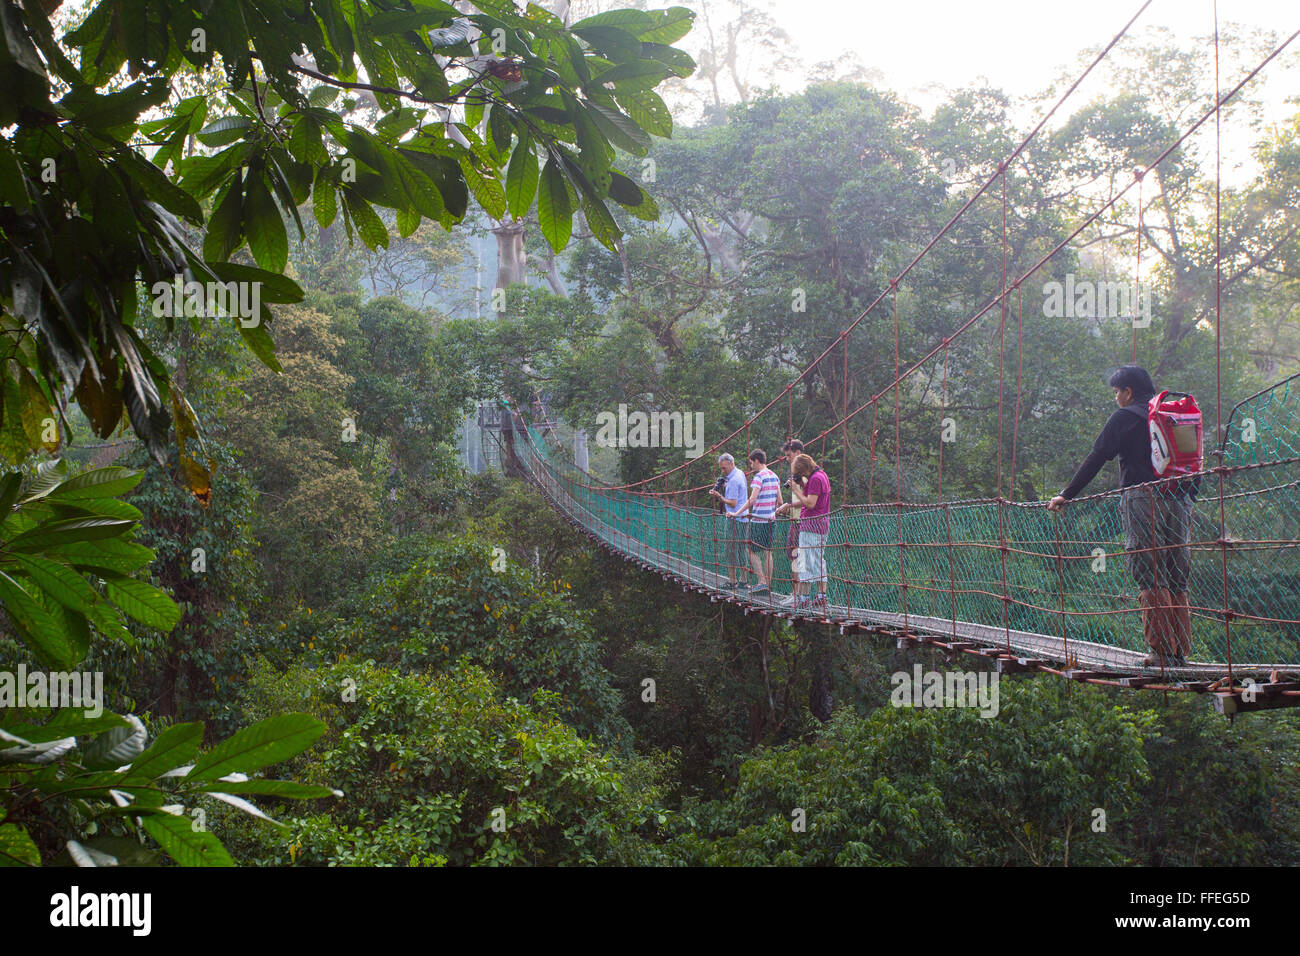 Tourists on a canopy walkway in the Danum Valley, Sabah, Malaysia Stock Photo